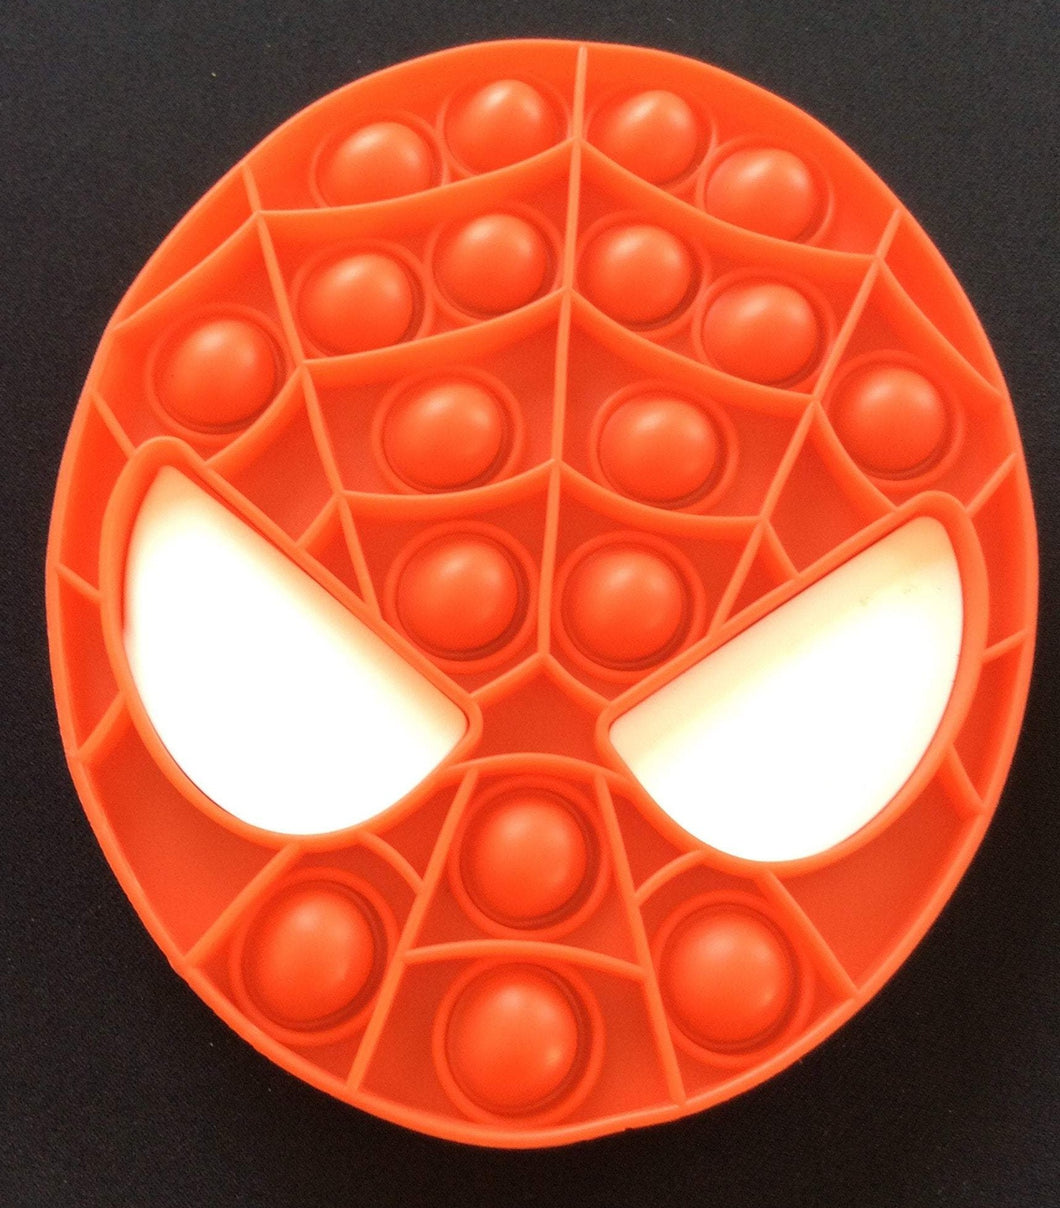 4.75 inches wide x 5.5 inches tall Spider-Man Shaped Bubble Pop It Fidget